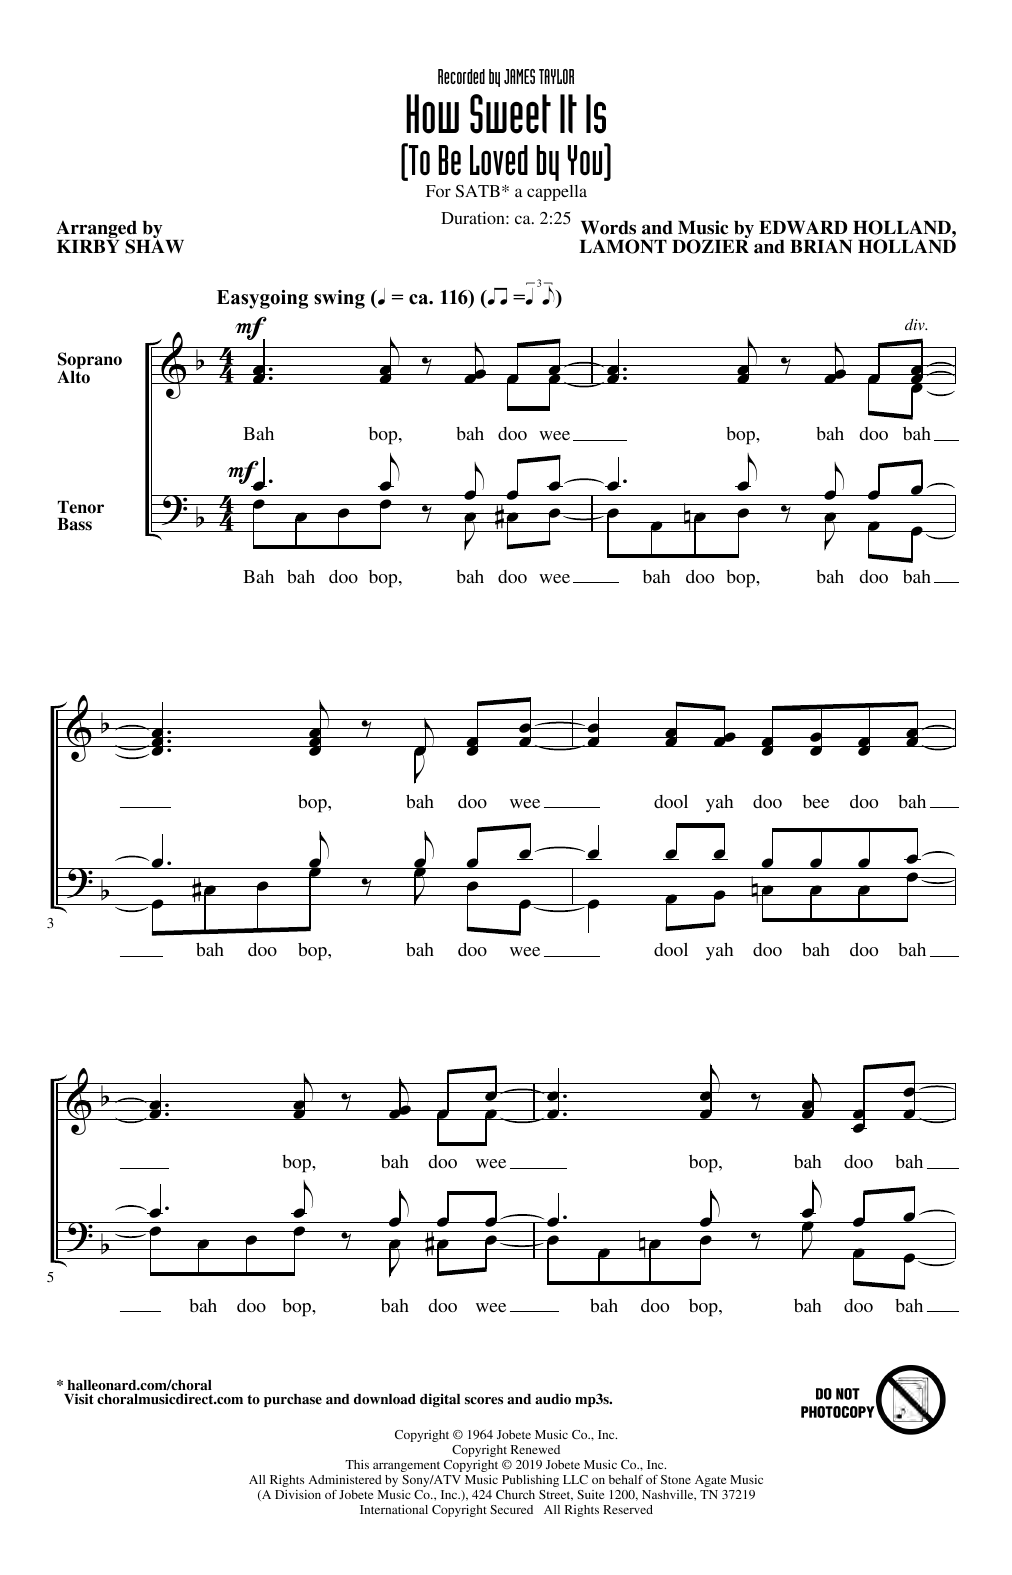 Download James Taylor How Sweet It Is (To Be Loved By You) (a Sheet Music